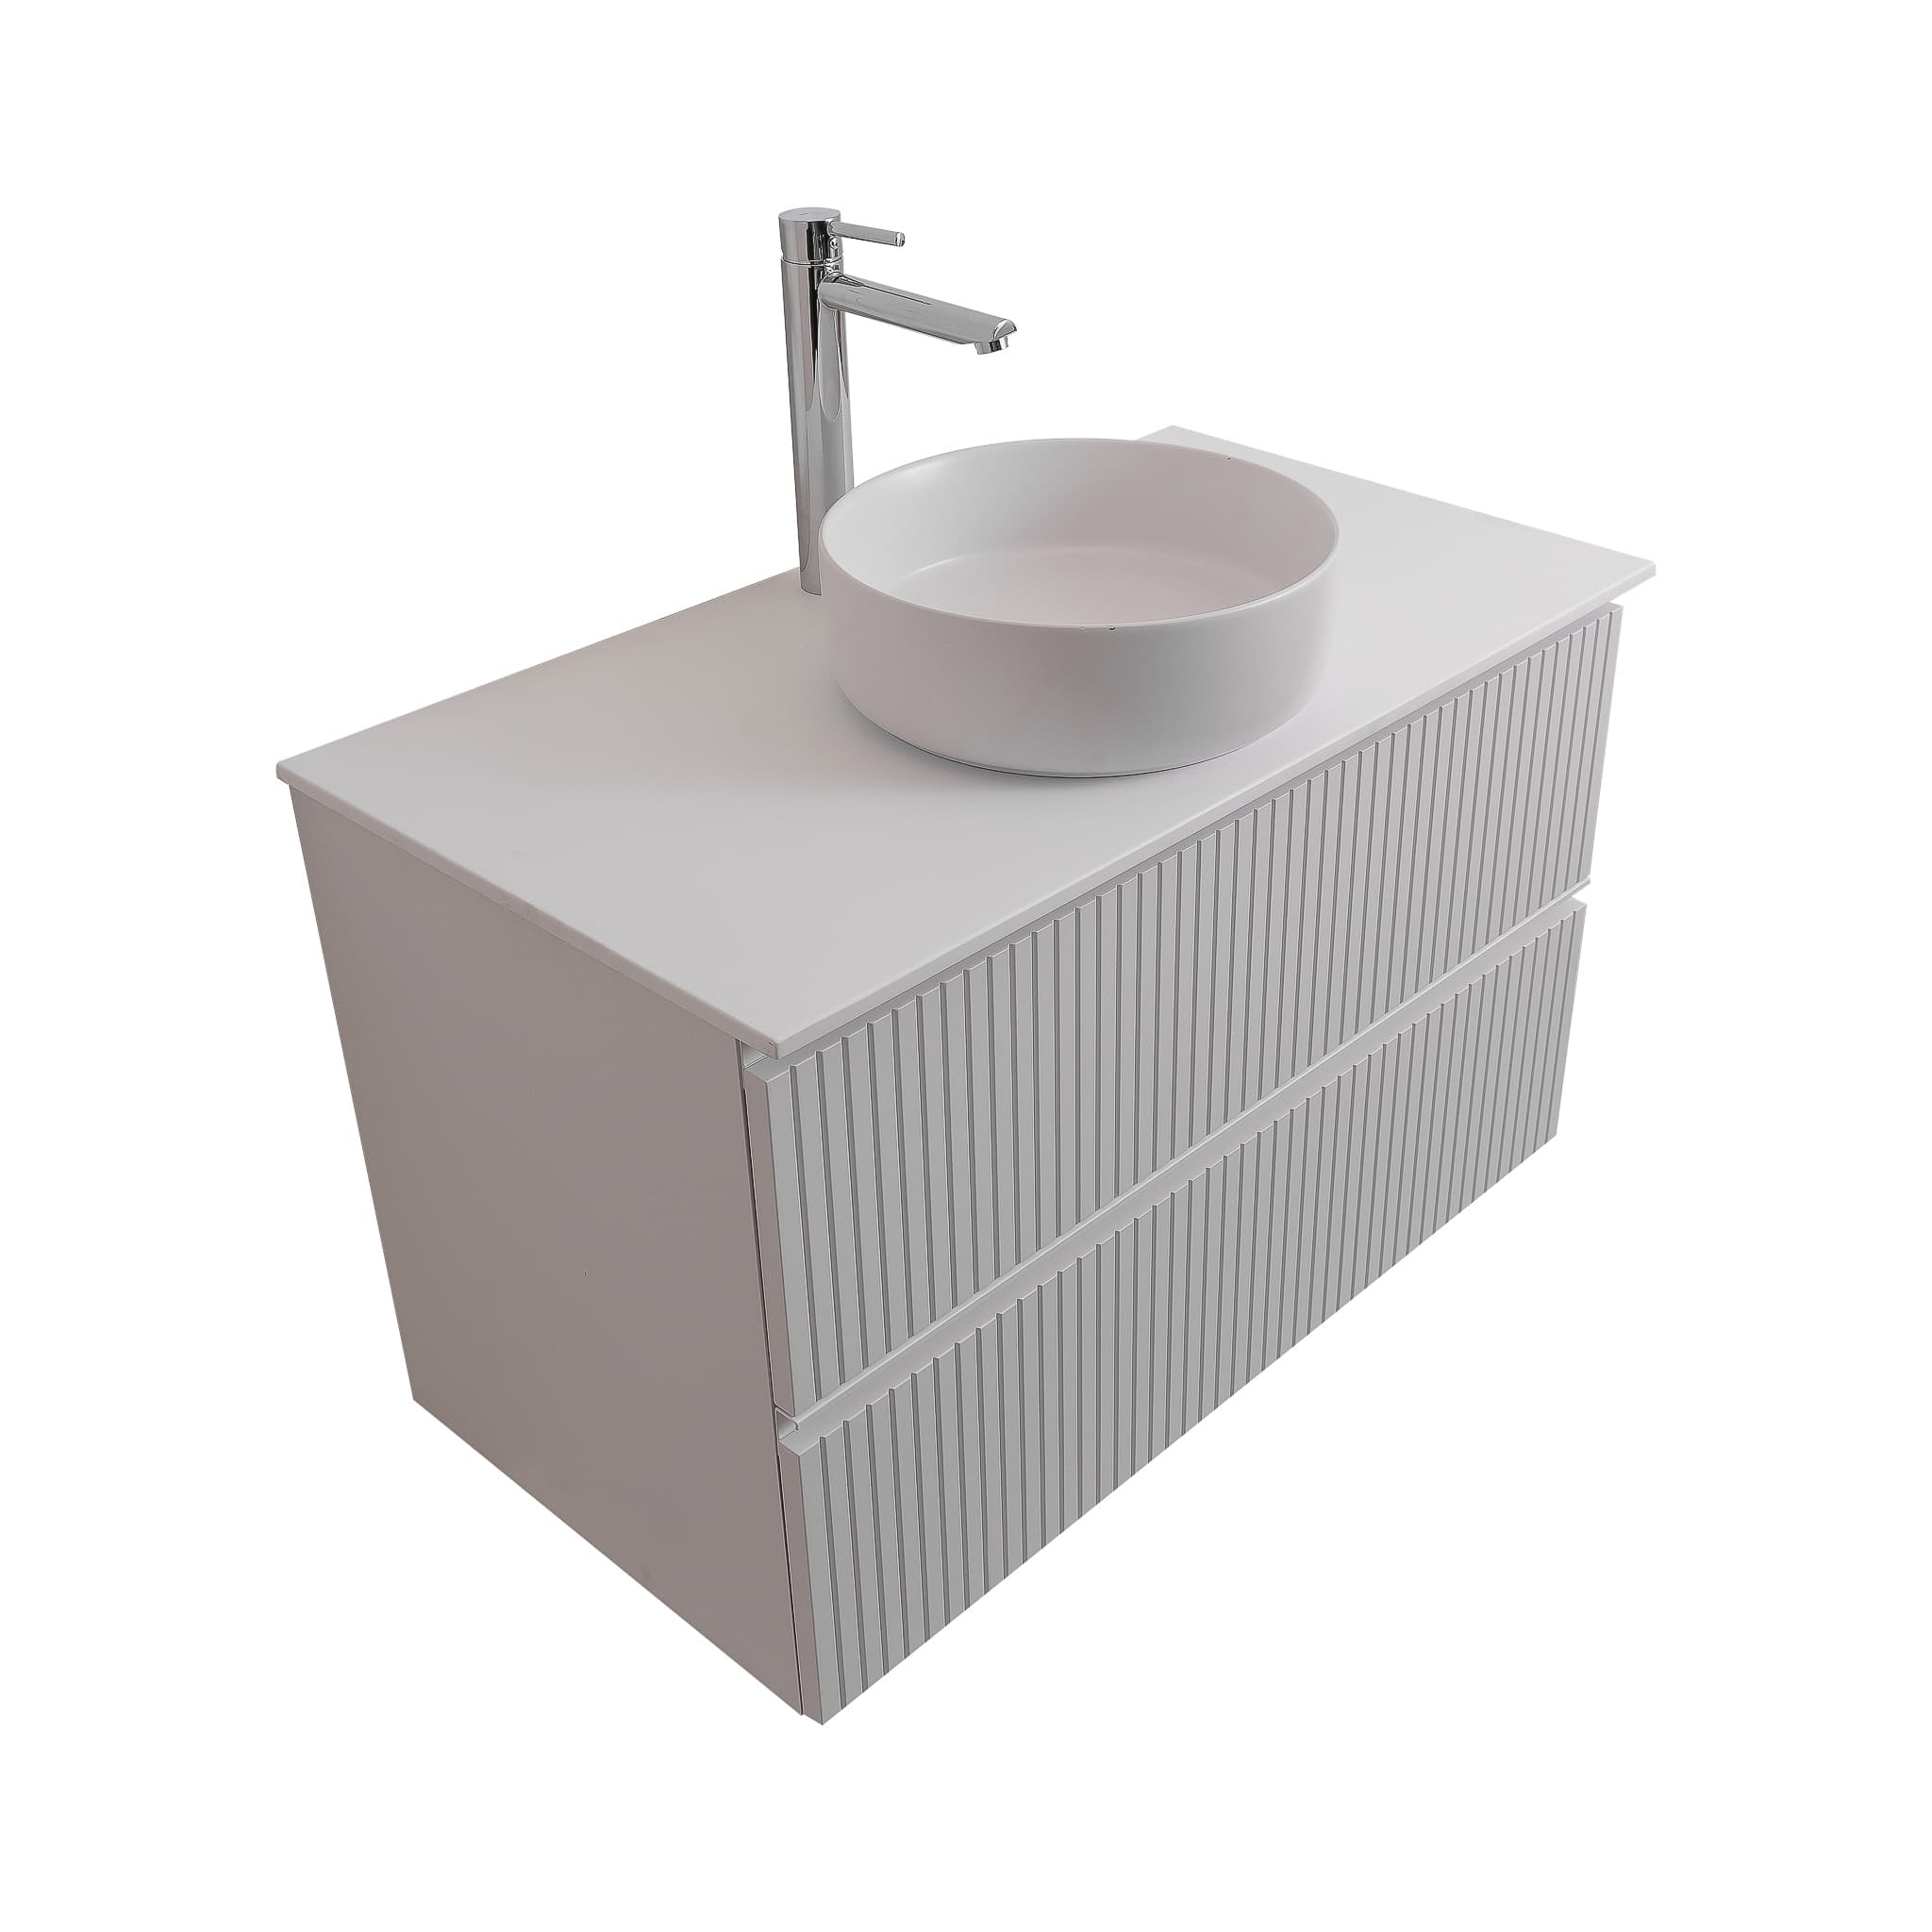 Ares 31.5 Matte White Cabinet, Ares White Top And Ares White Ceramic Basin, Wall Mounted Modern Vanity Set